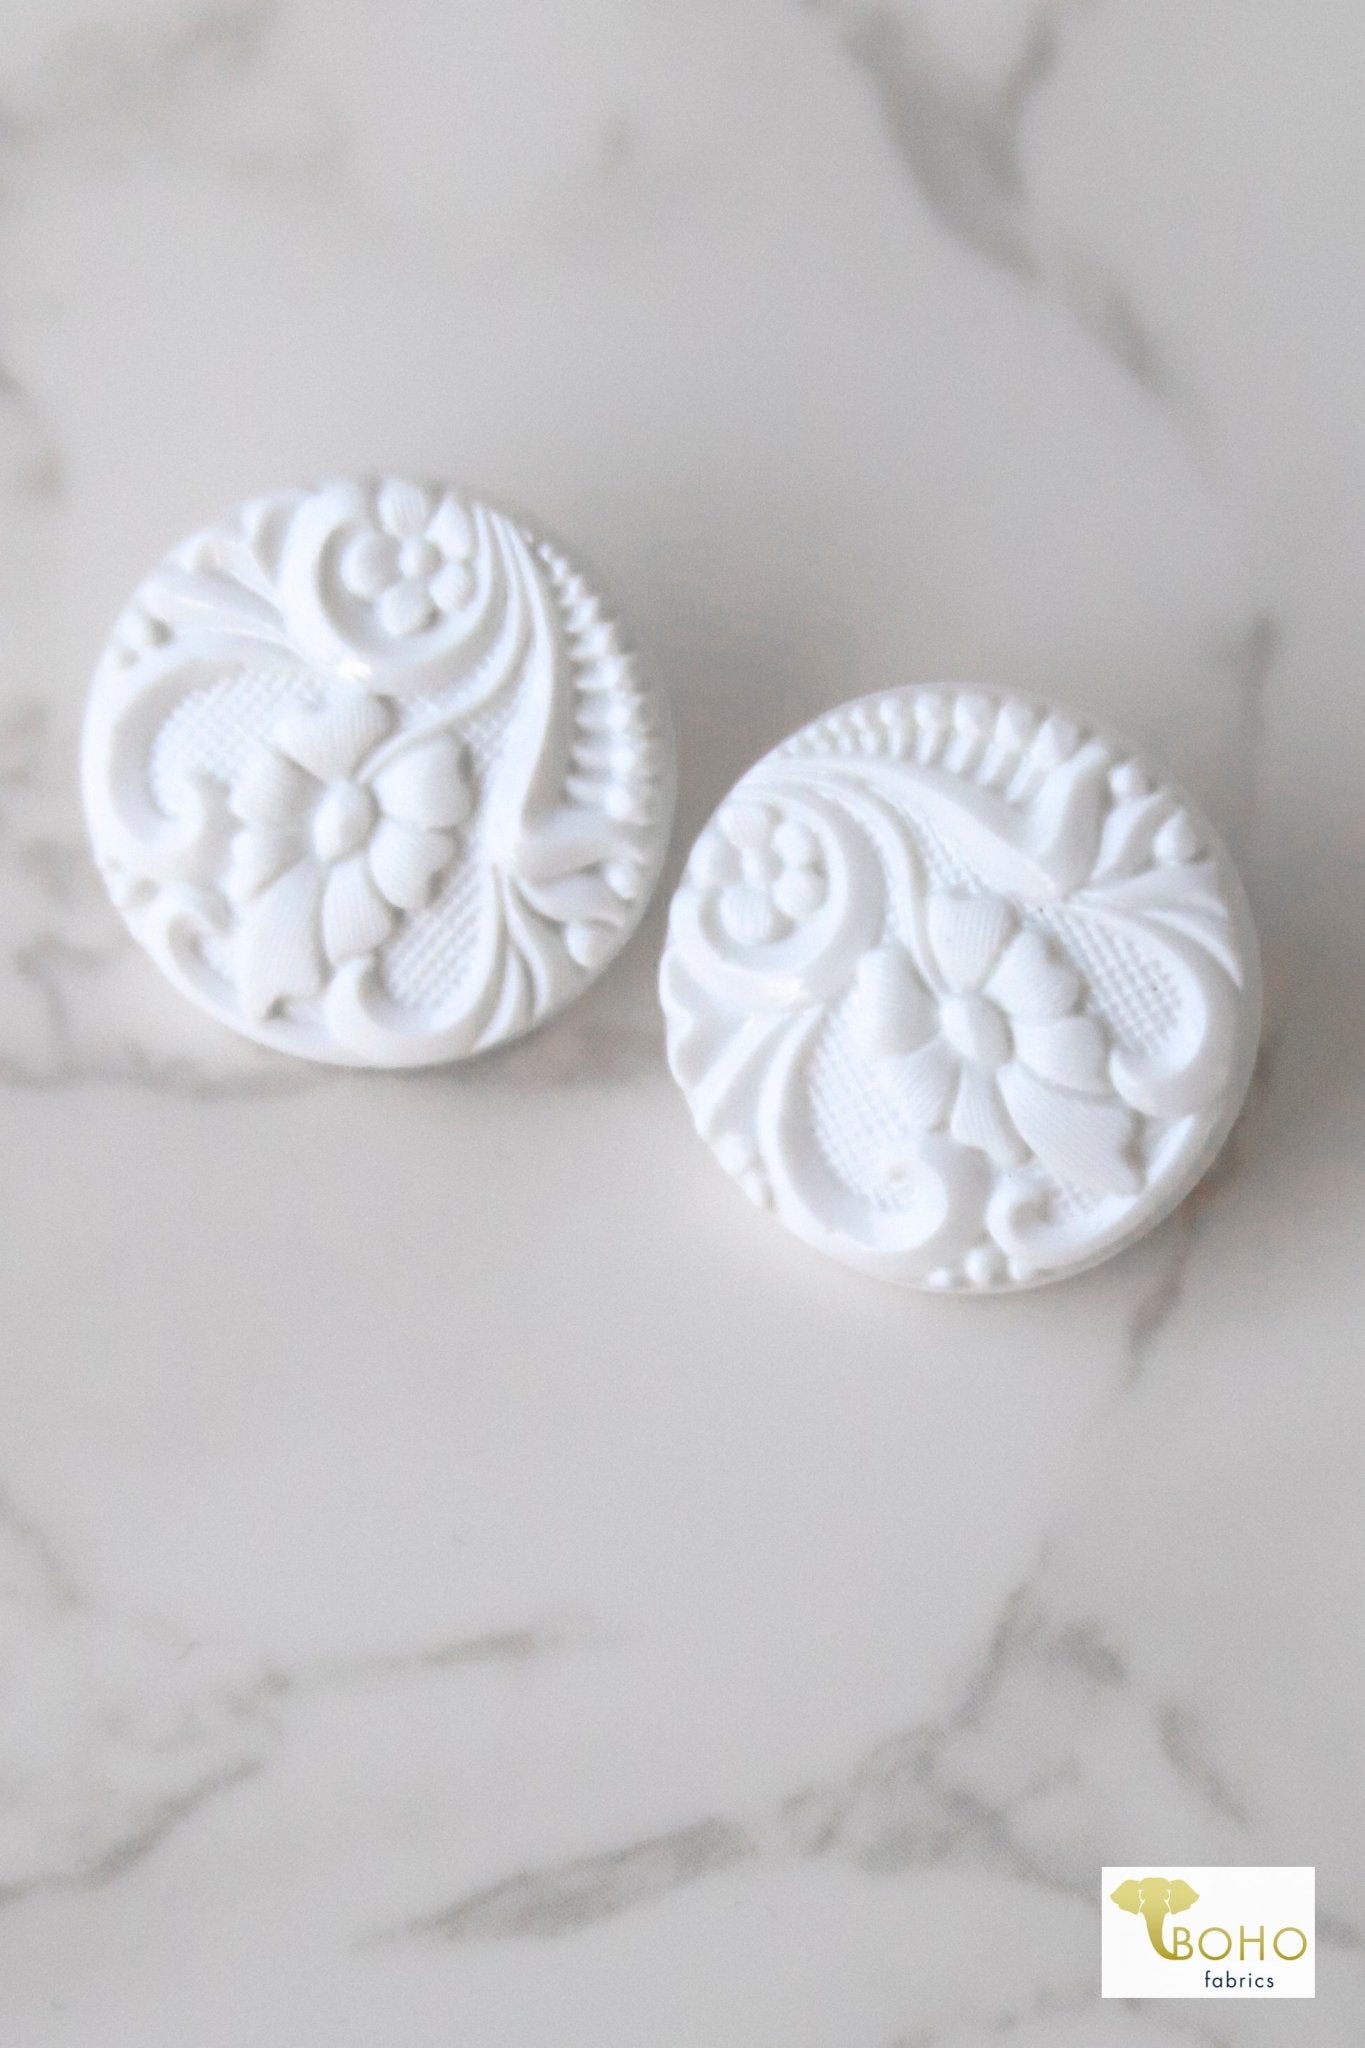 White, Art Nouveau Florals, Shank Buttons. Available in 15mm, 18mm, 20mm, 25.5mm - Boho Fabrics